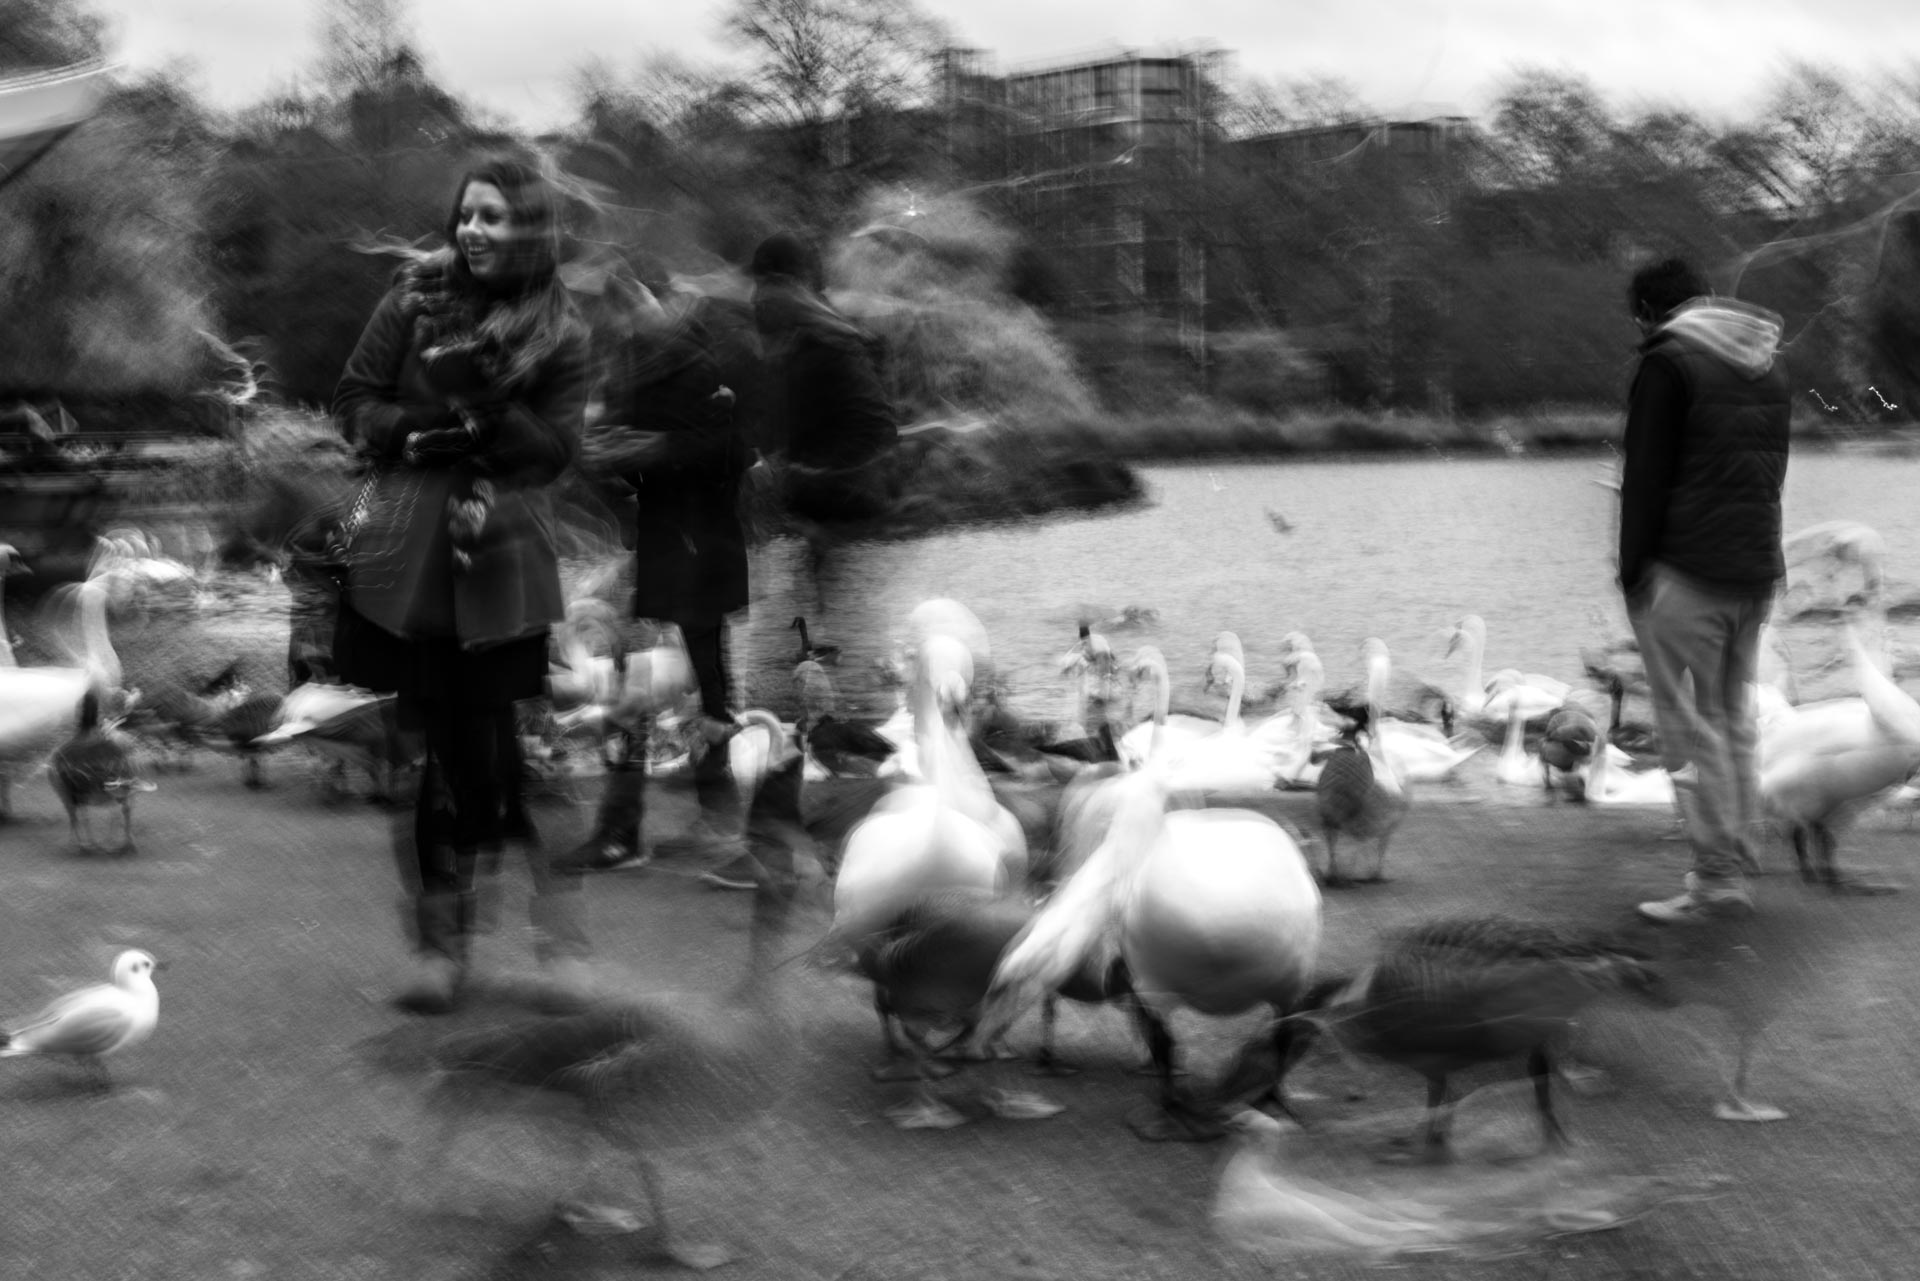 Birds in Hyde Park, Streets, london photography, street photographers, tempest photography, tumblr photography, photography